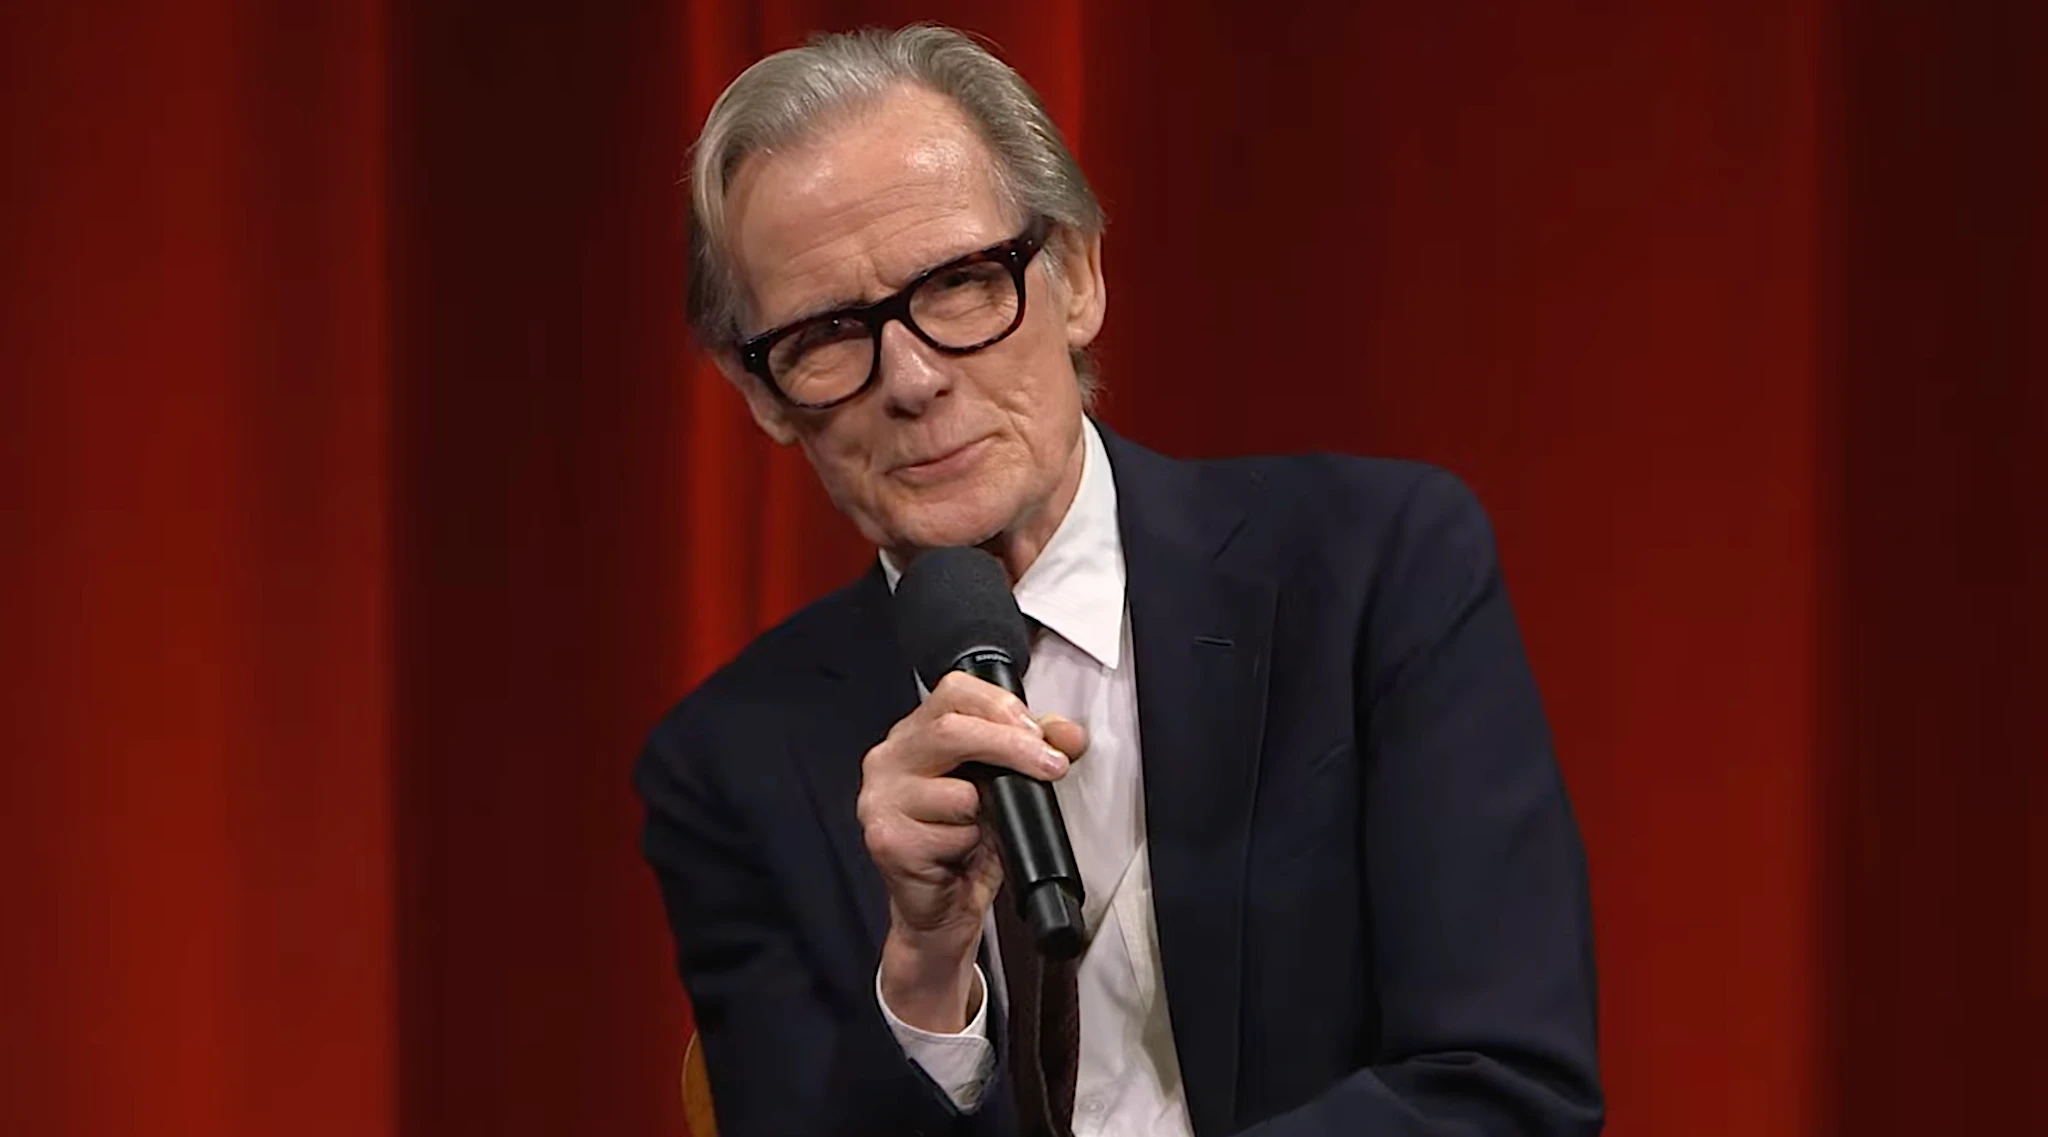 Bill Nighy Reveals the 'Lucky' Way He Landed His Role in 'Living' | Academy Conversations